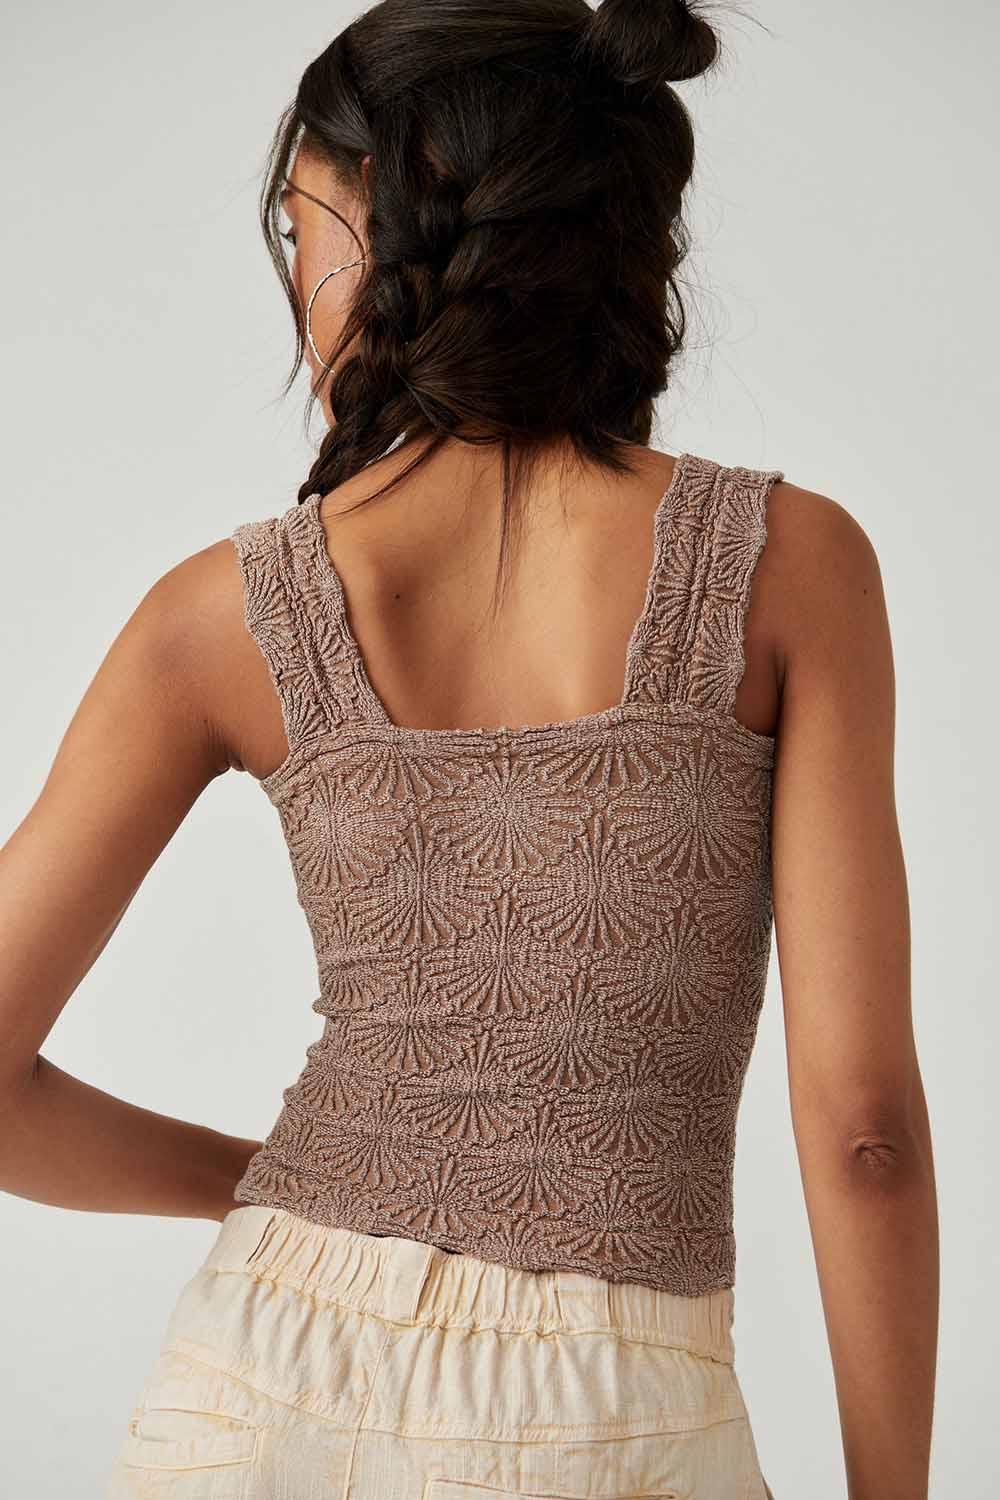 Free People - Love Letter Cami - Strawberry Roan - Back